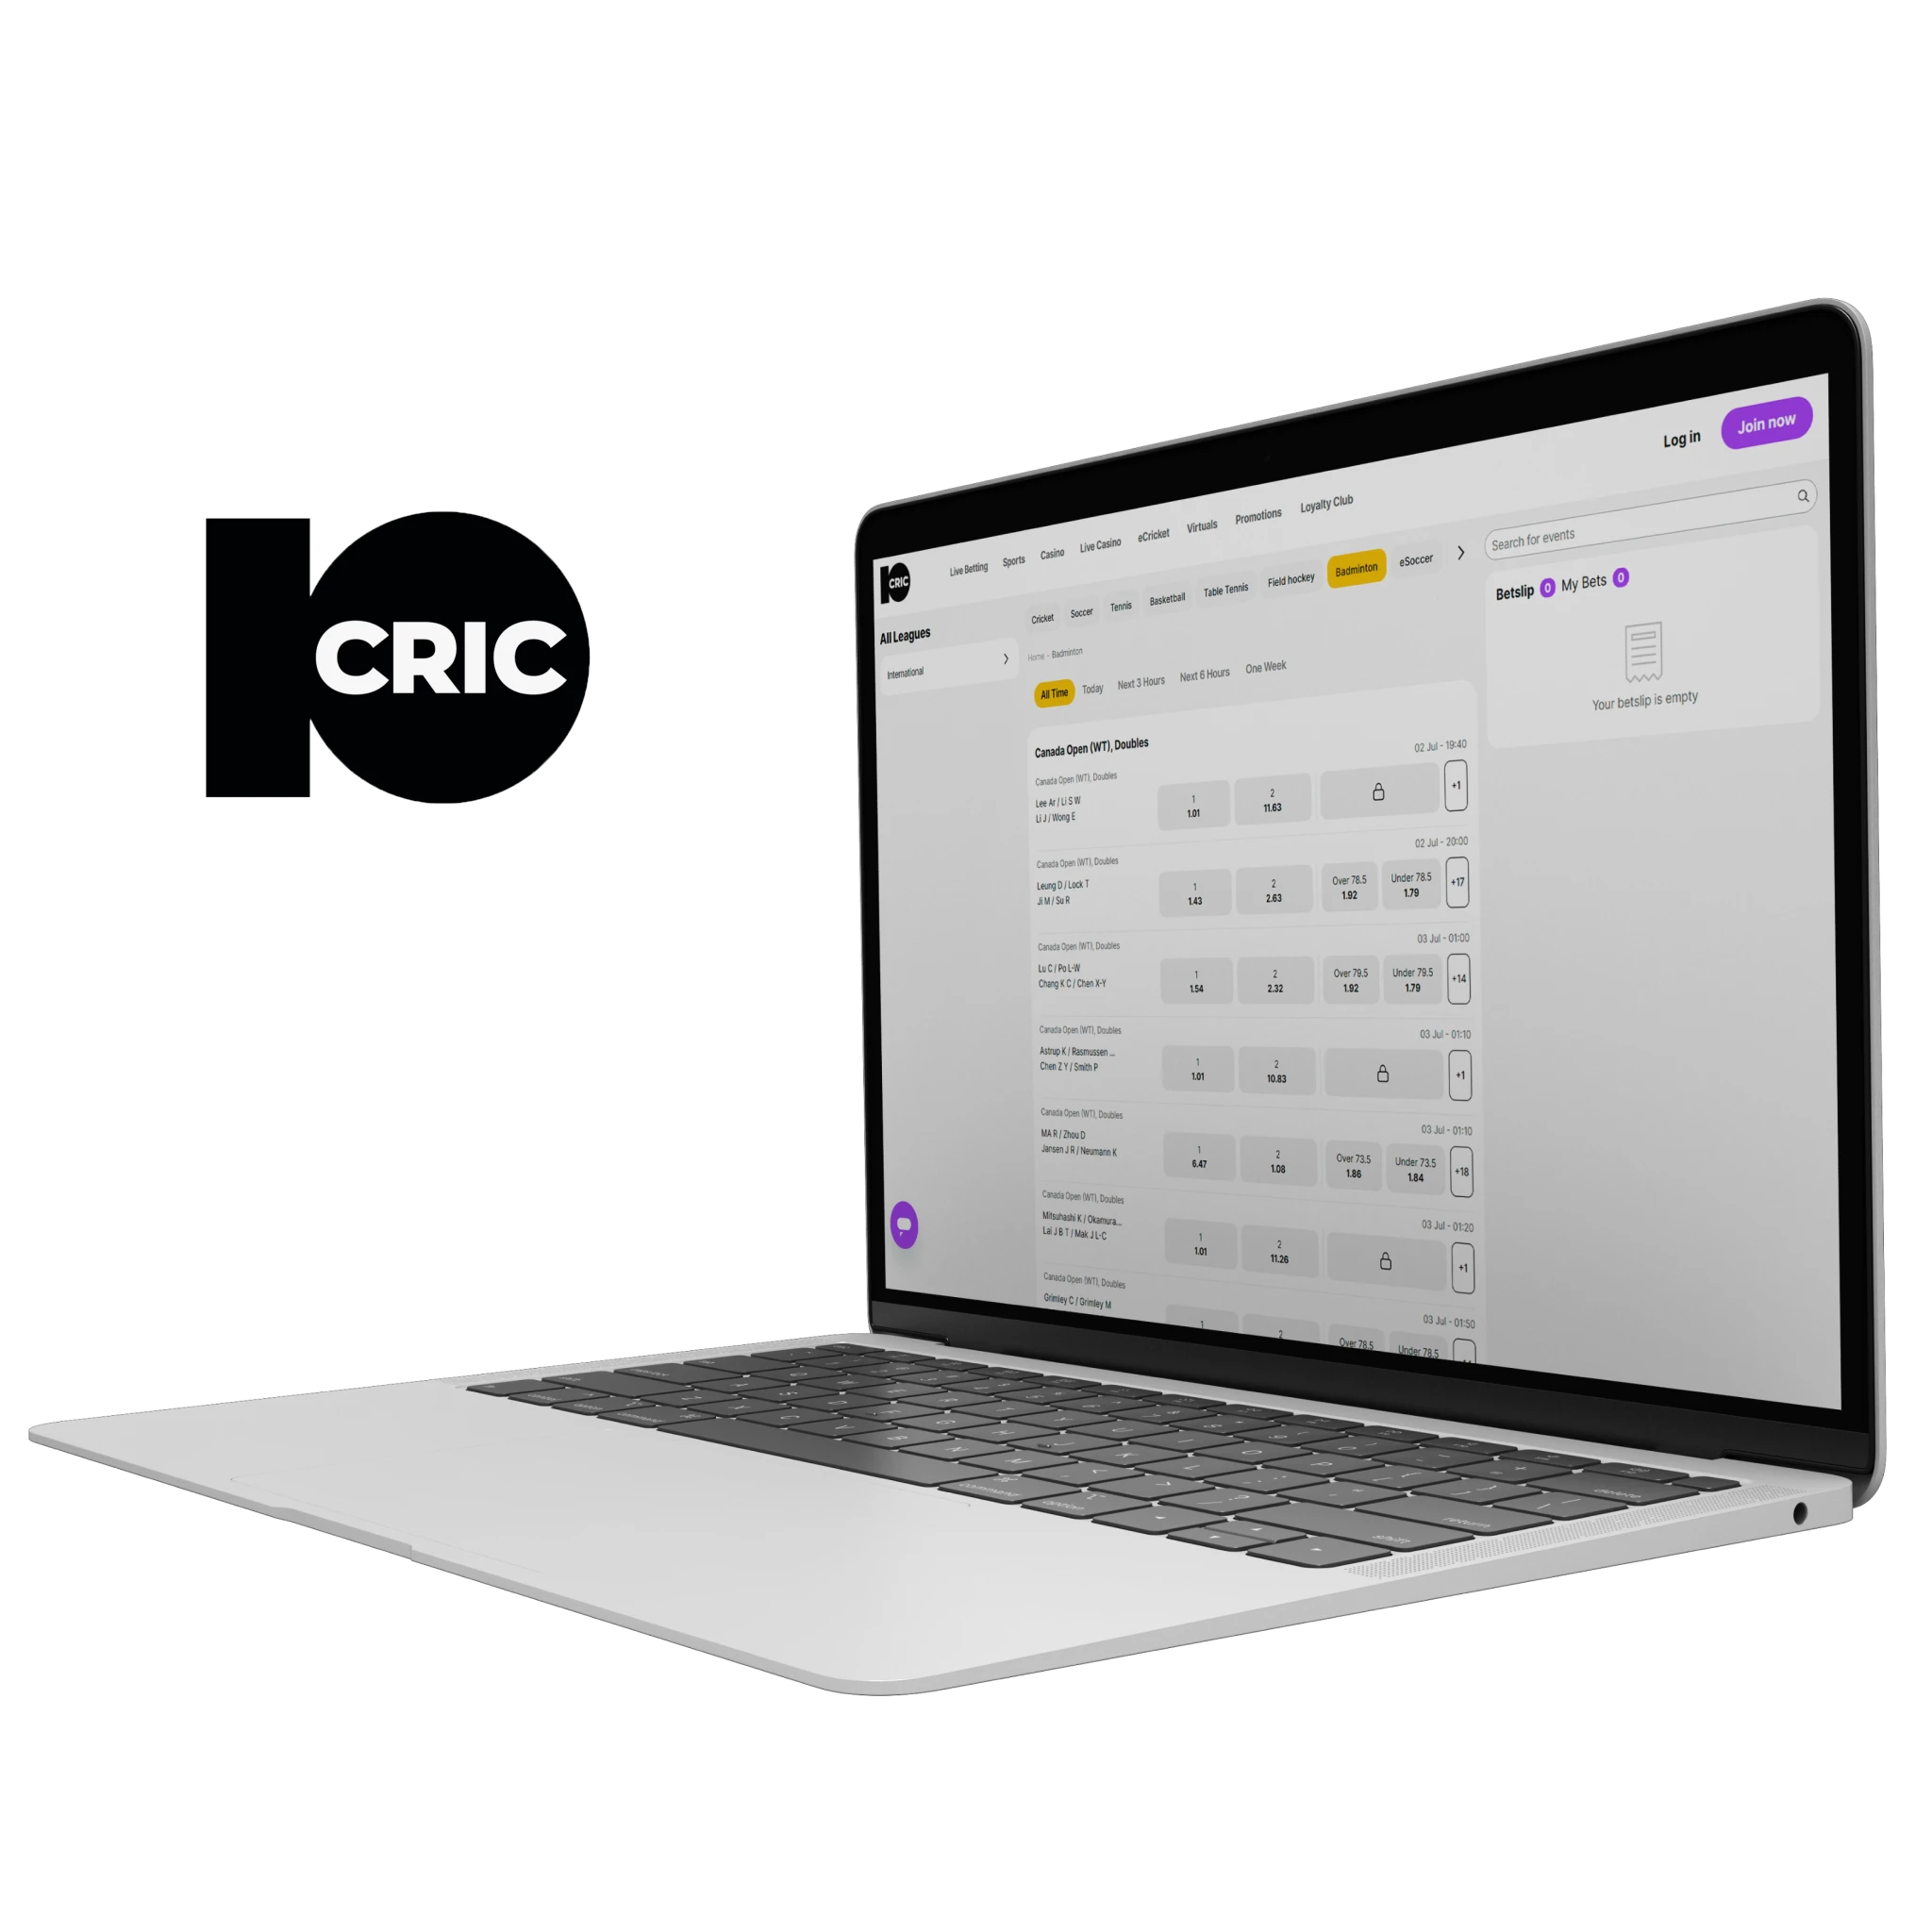 10cric has established itself as one of the best badminton betting platforms.